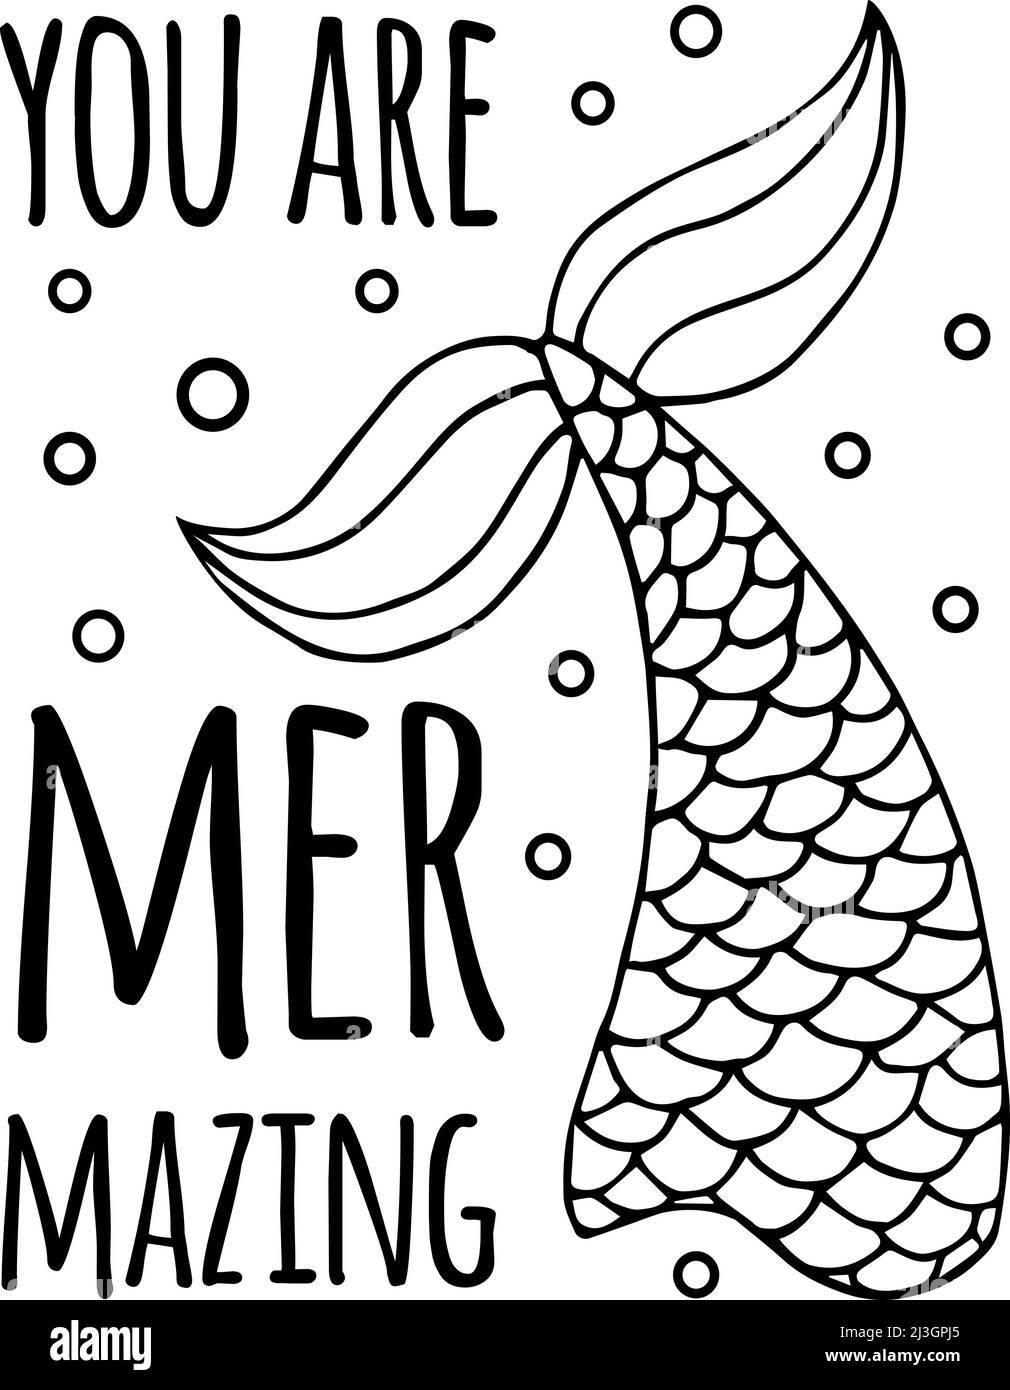 Vector black hand drawn mermaid quote with fish tail isolated on white background. You are mermazing lettering illustration Stock Vector